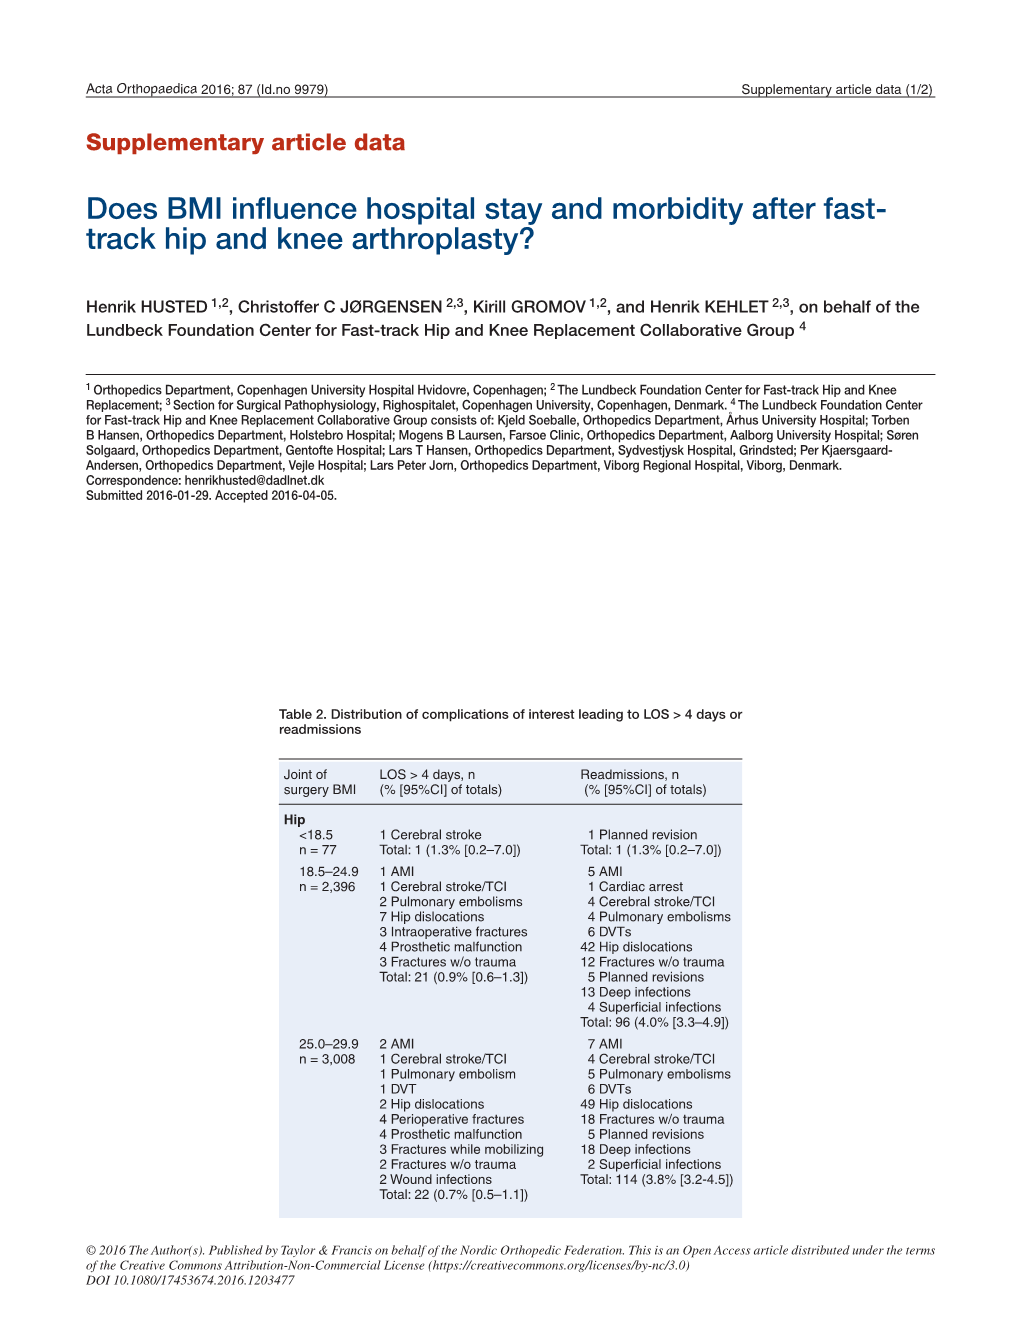 Does BMI Influence Hospital Stay and Morbidity After Fasttrack Hip And